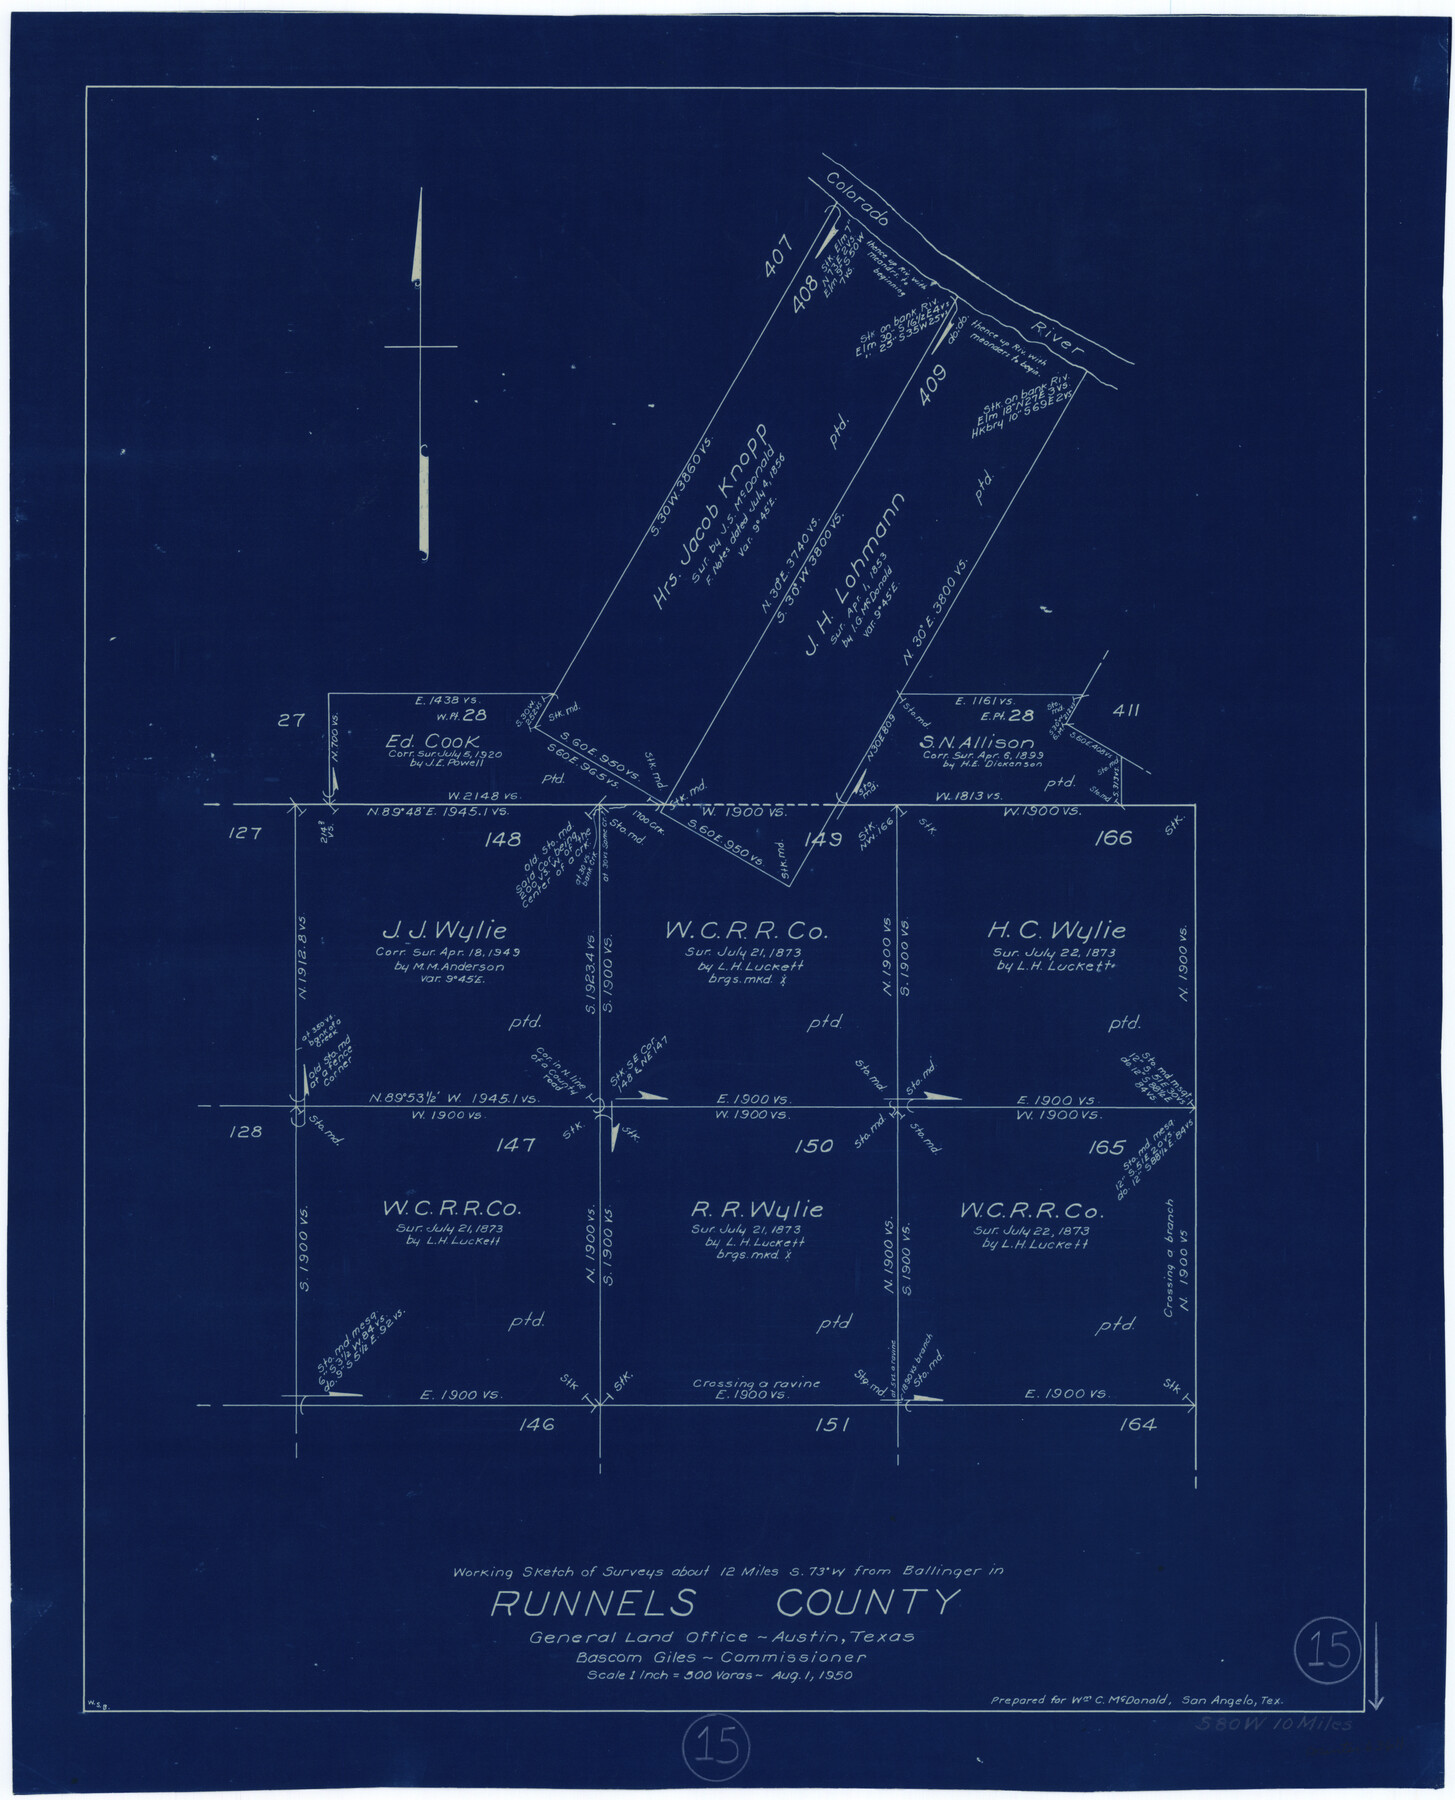 63611, Runnels County Working Sketch 15, General Map Collection